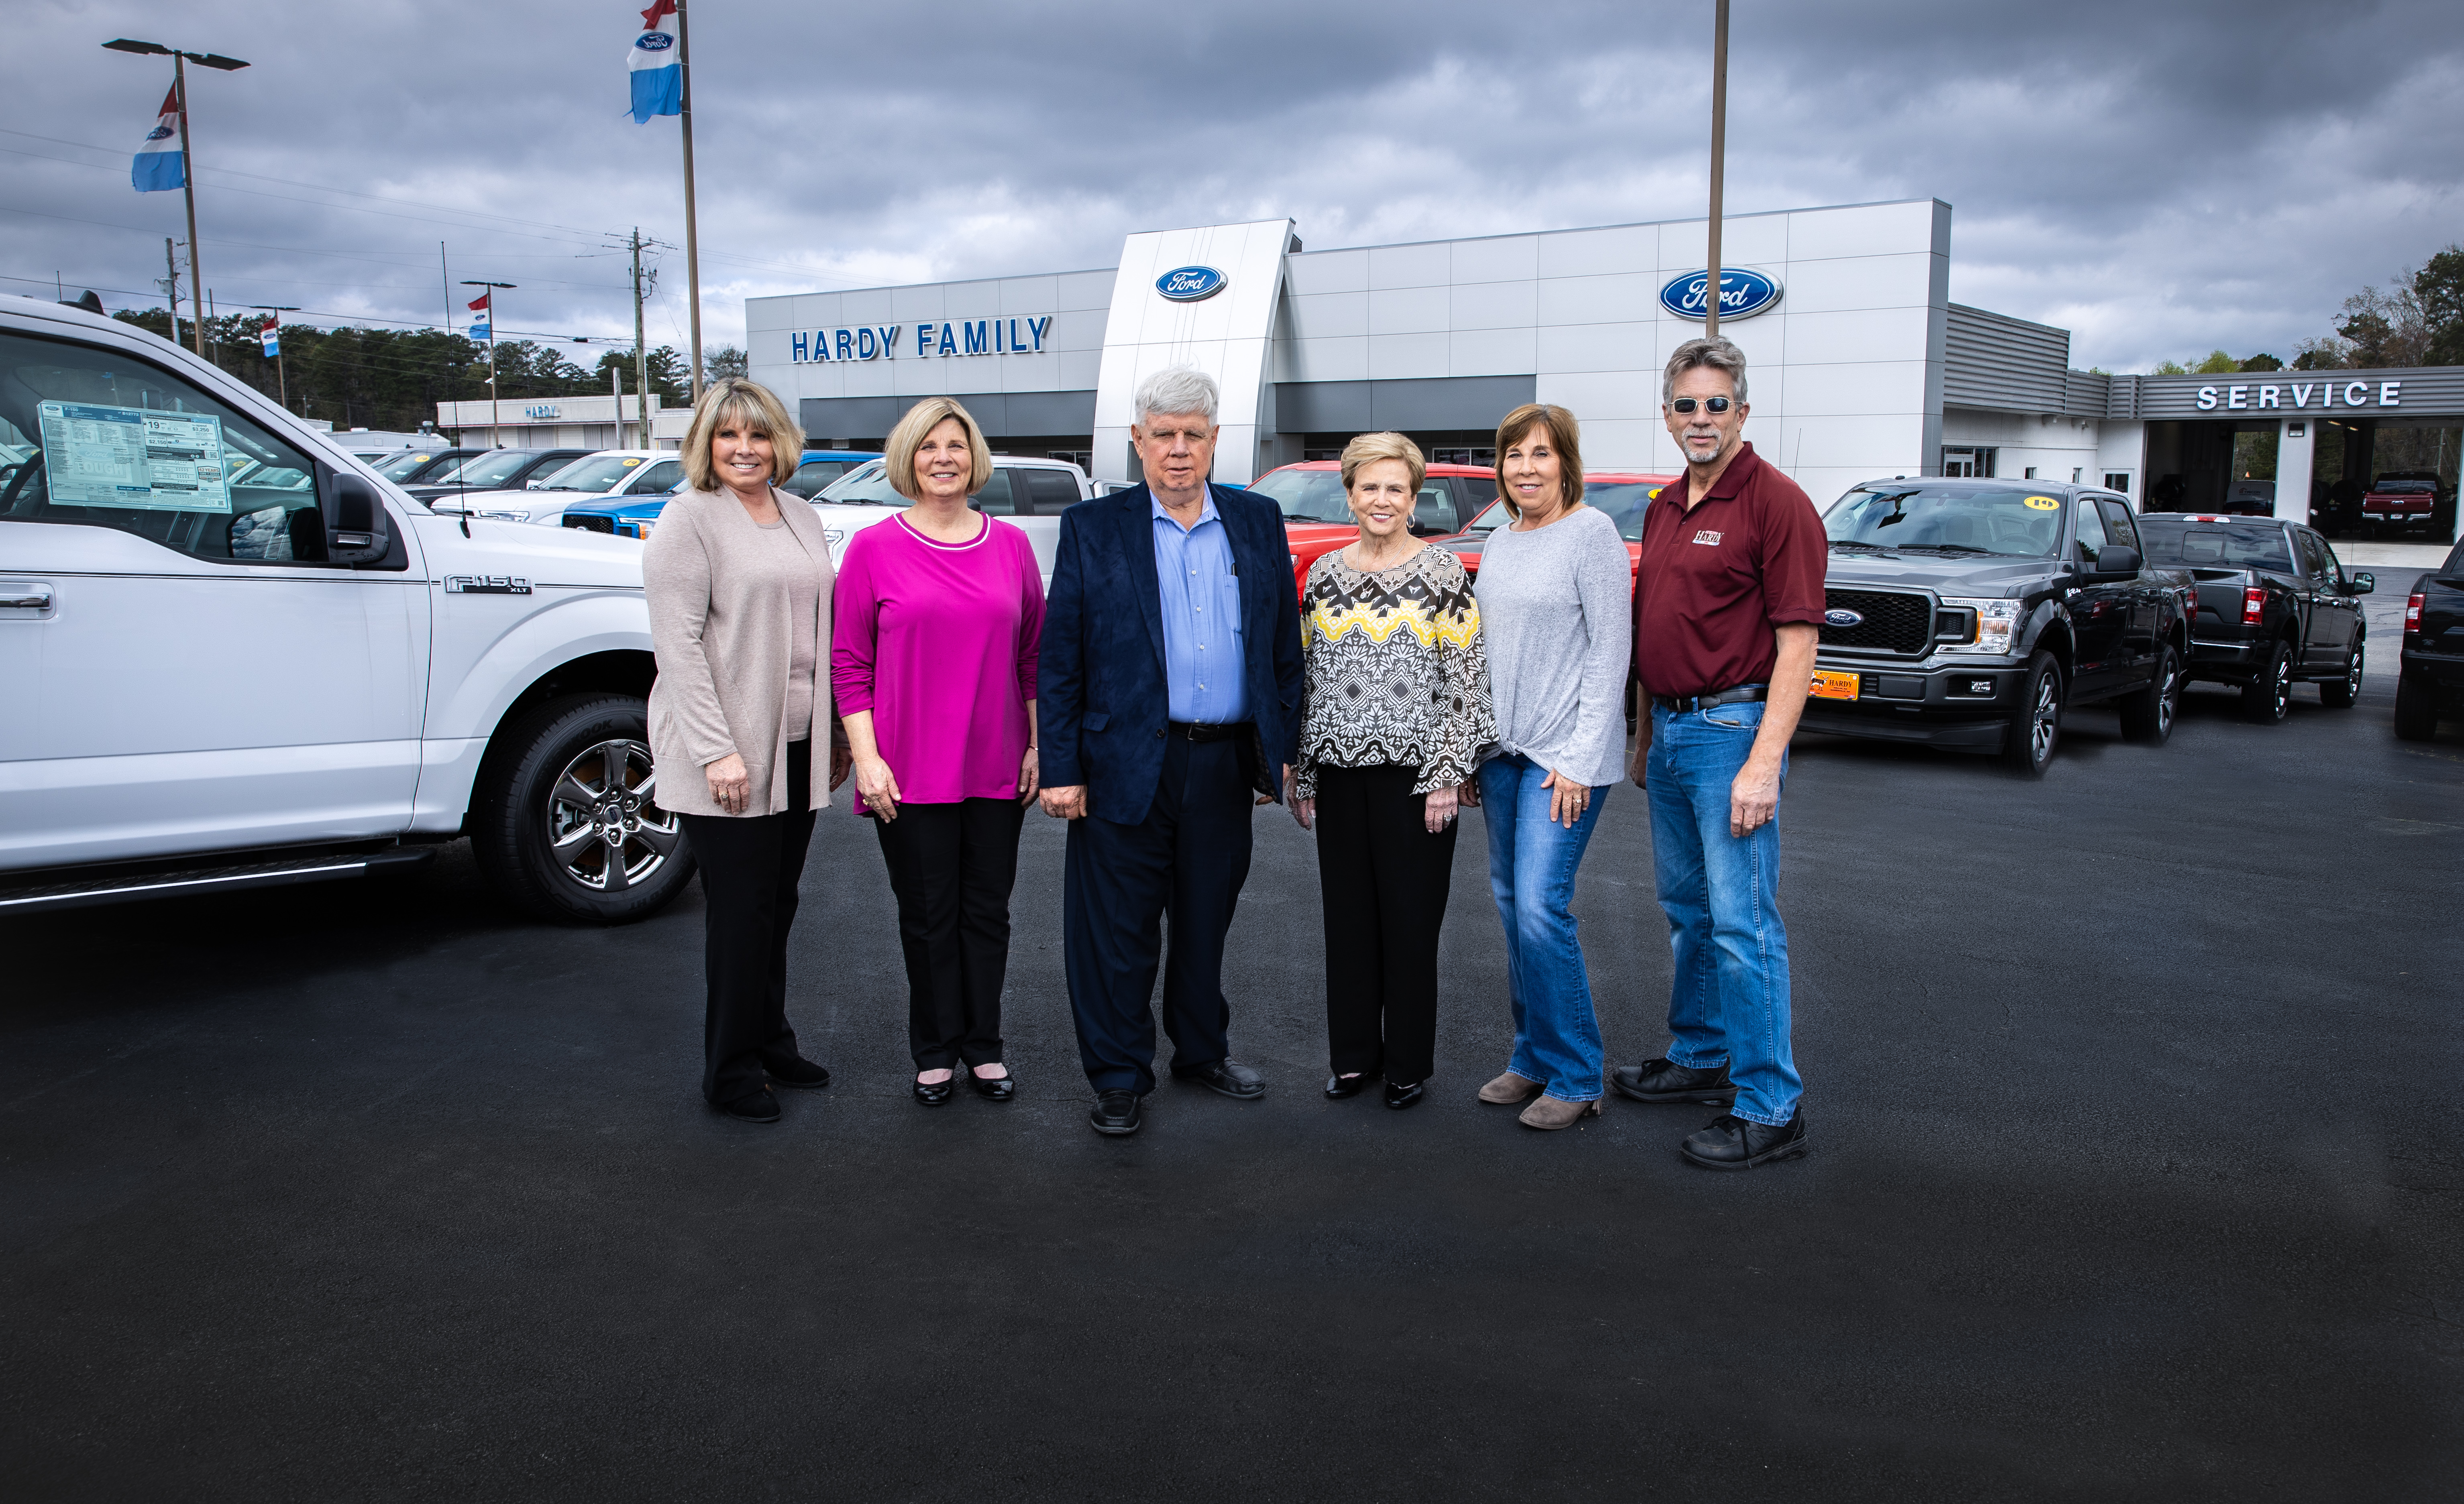 Hardy Family Ford - A Family-Owned Dealership in Dallas, GA